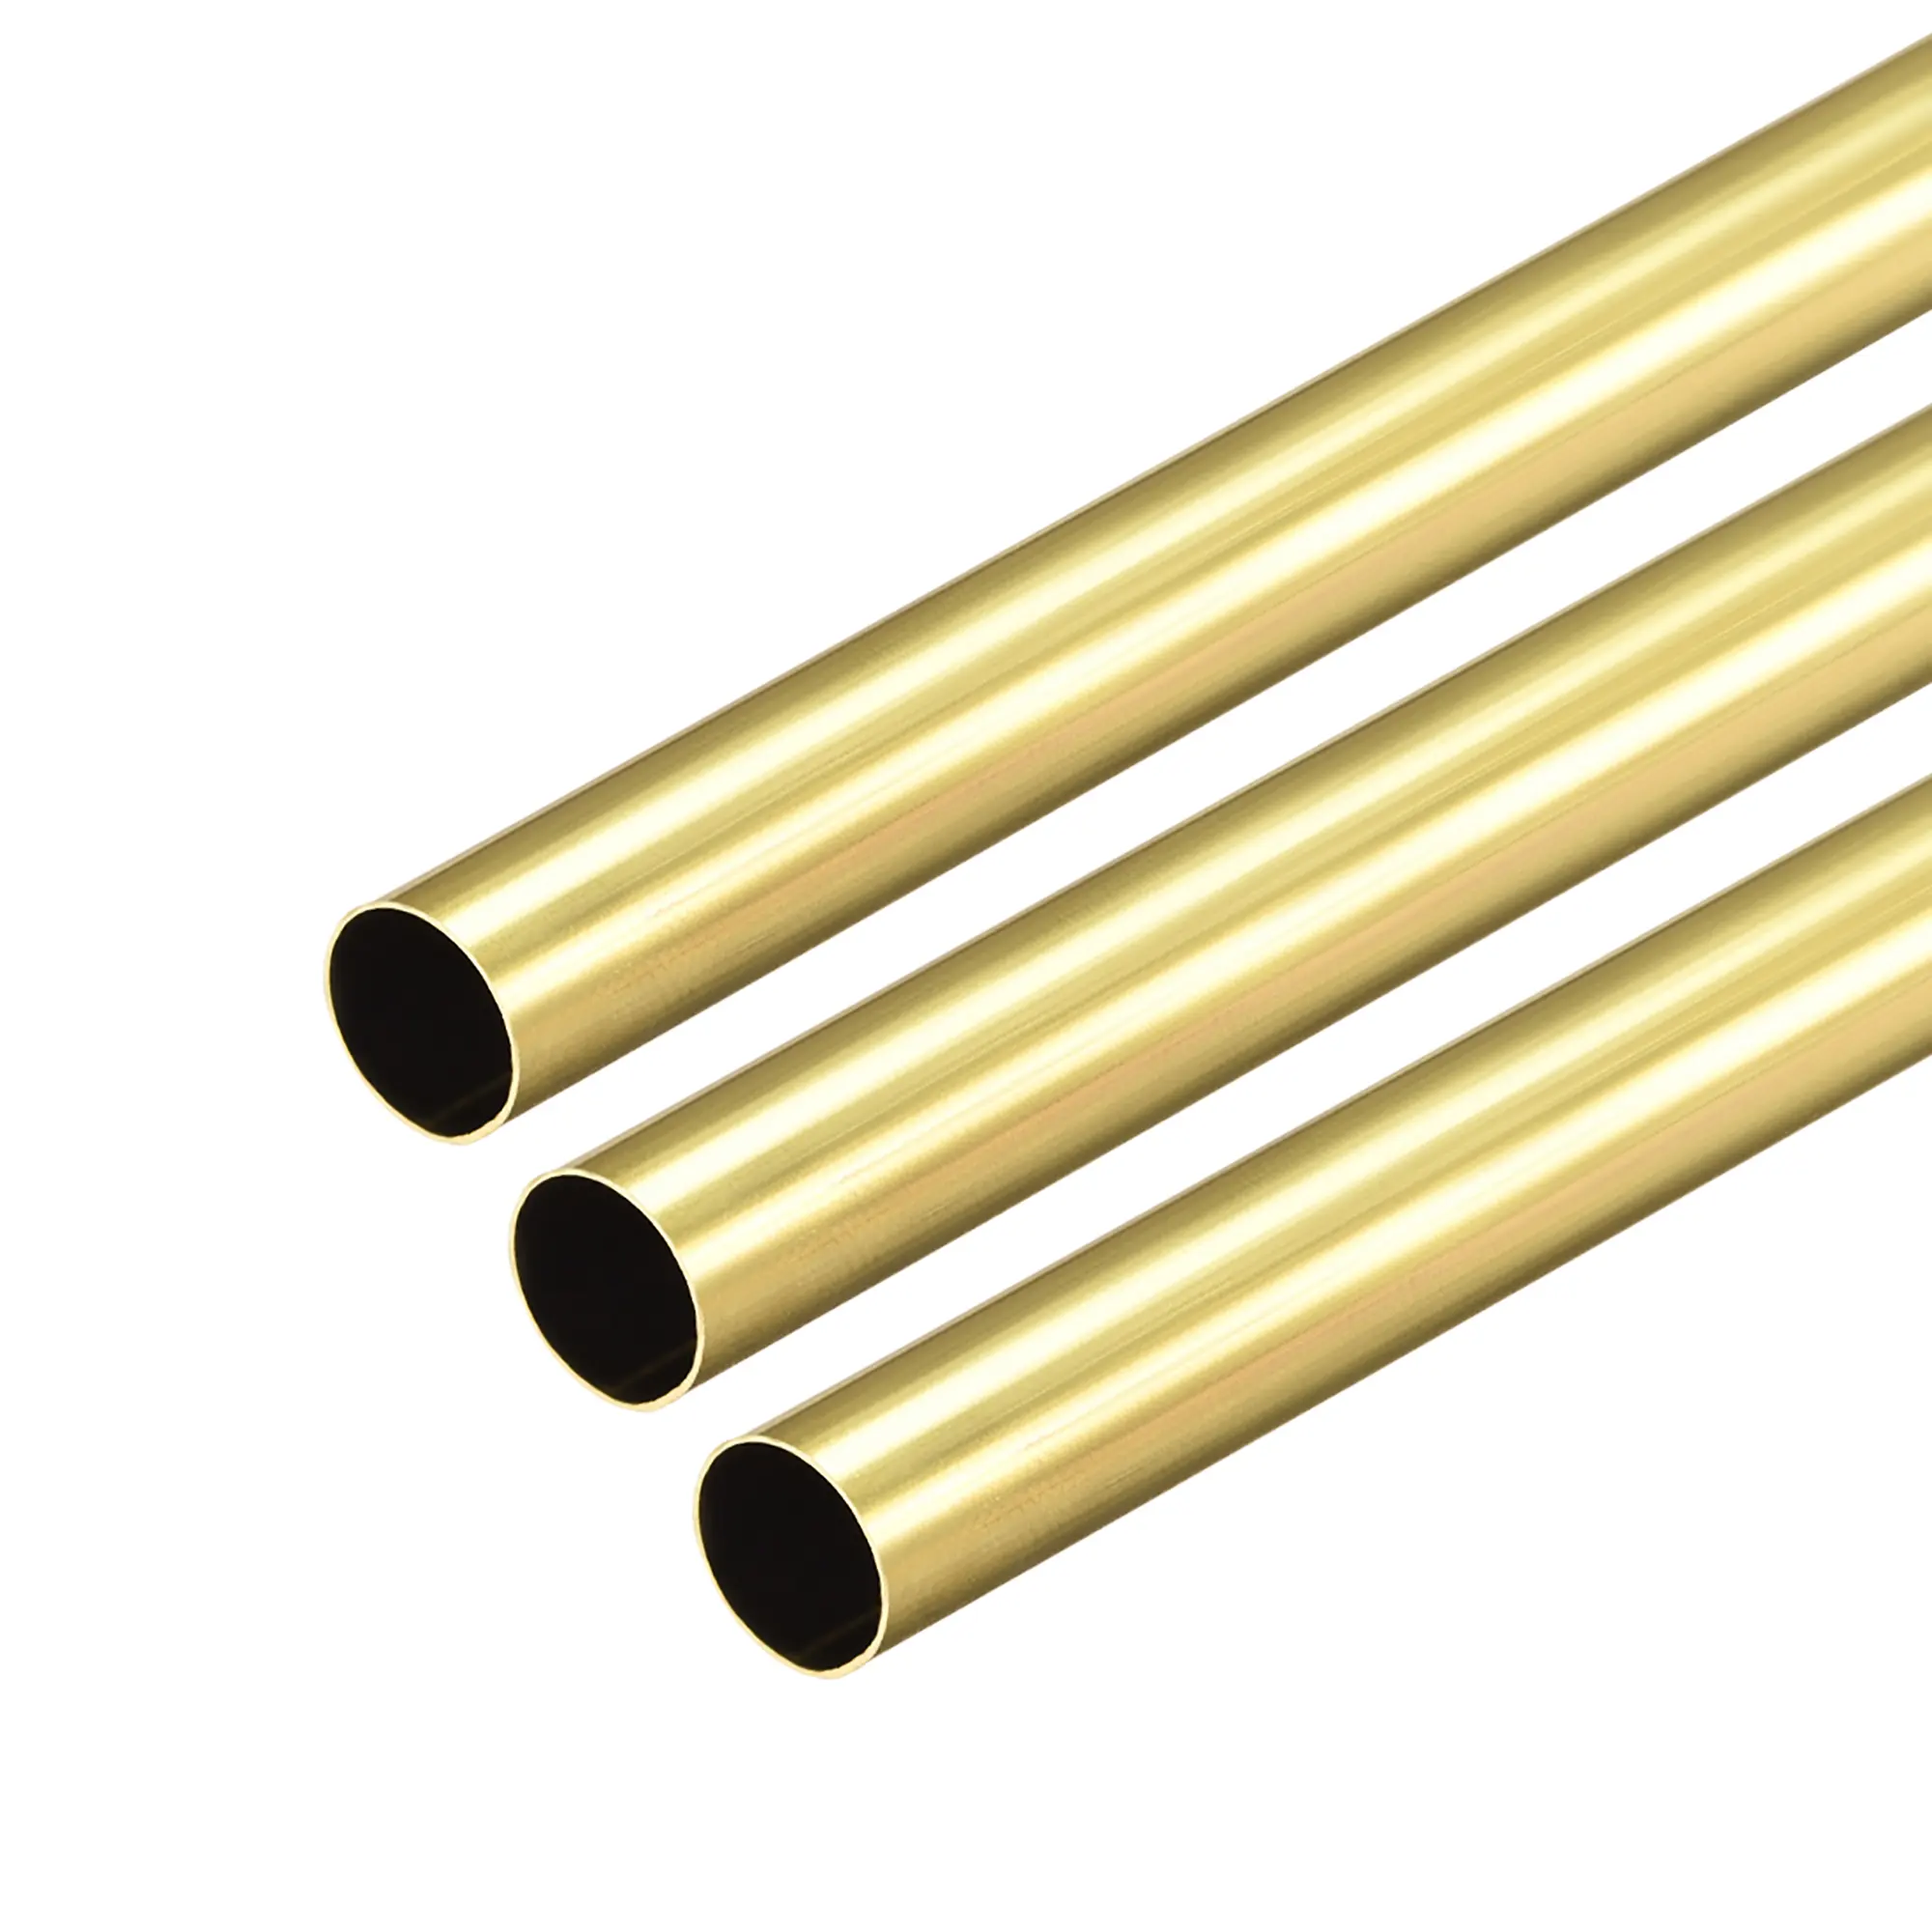 C27000 Brass Round Tube, 300mm Length 10mm OD 0.2mm Wall Thickness, Seamless Straight Pipe Tubing